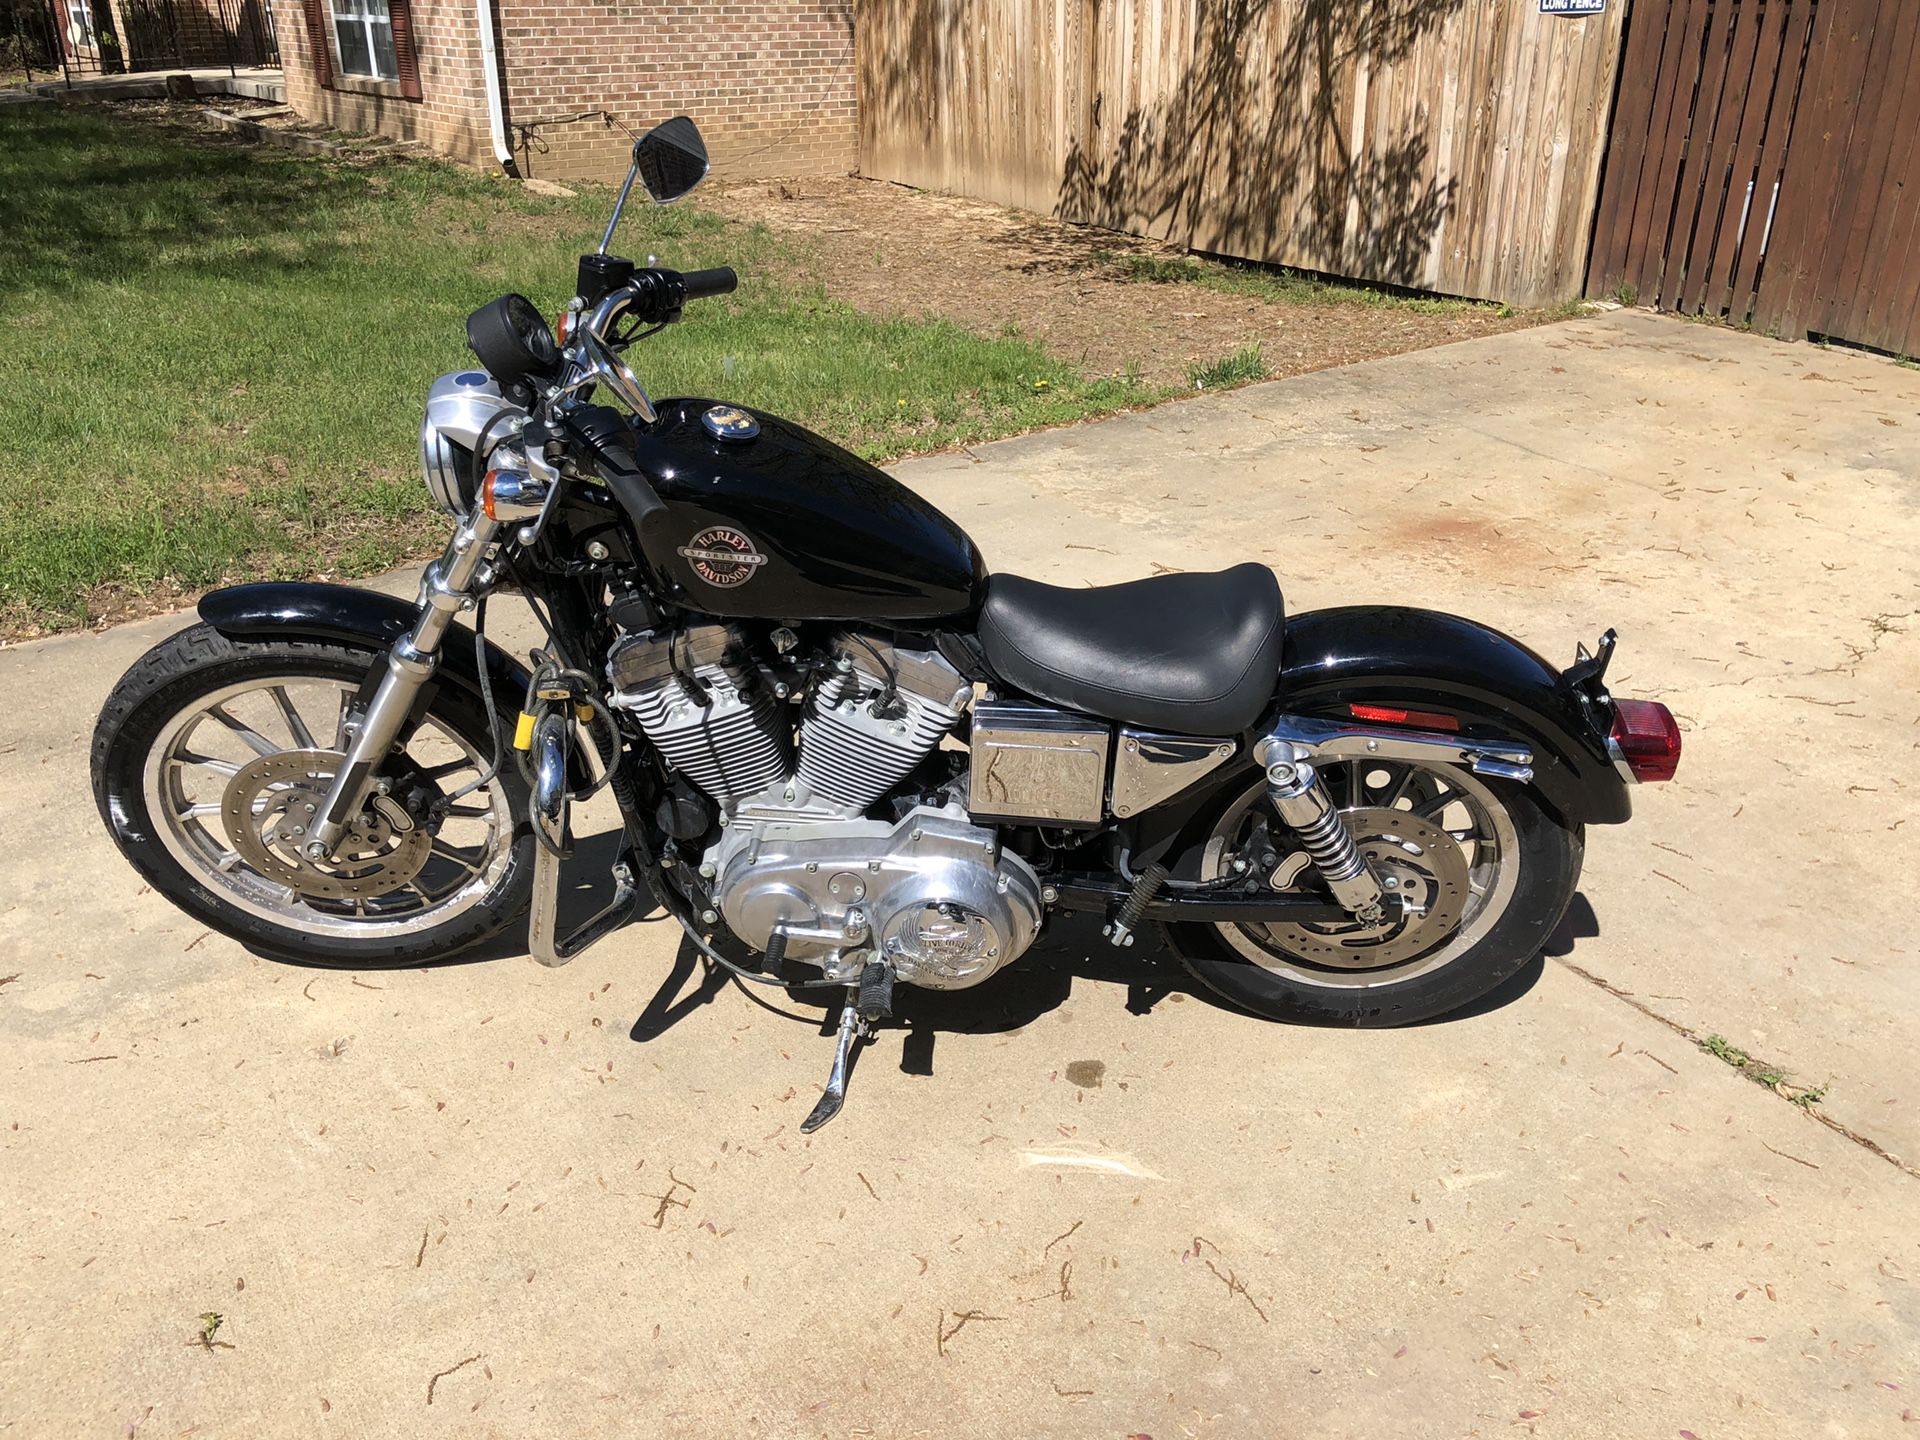 2002 Harley Davidson sportster 883 with only 2200 miles. WEEKEND DAY SPECIAL 3500 !!!!!!